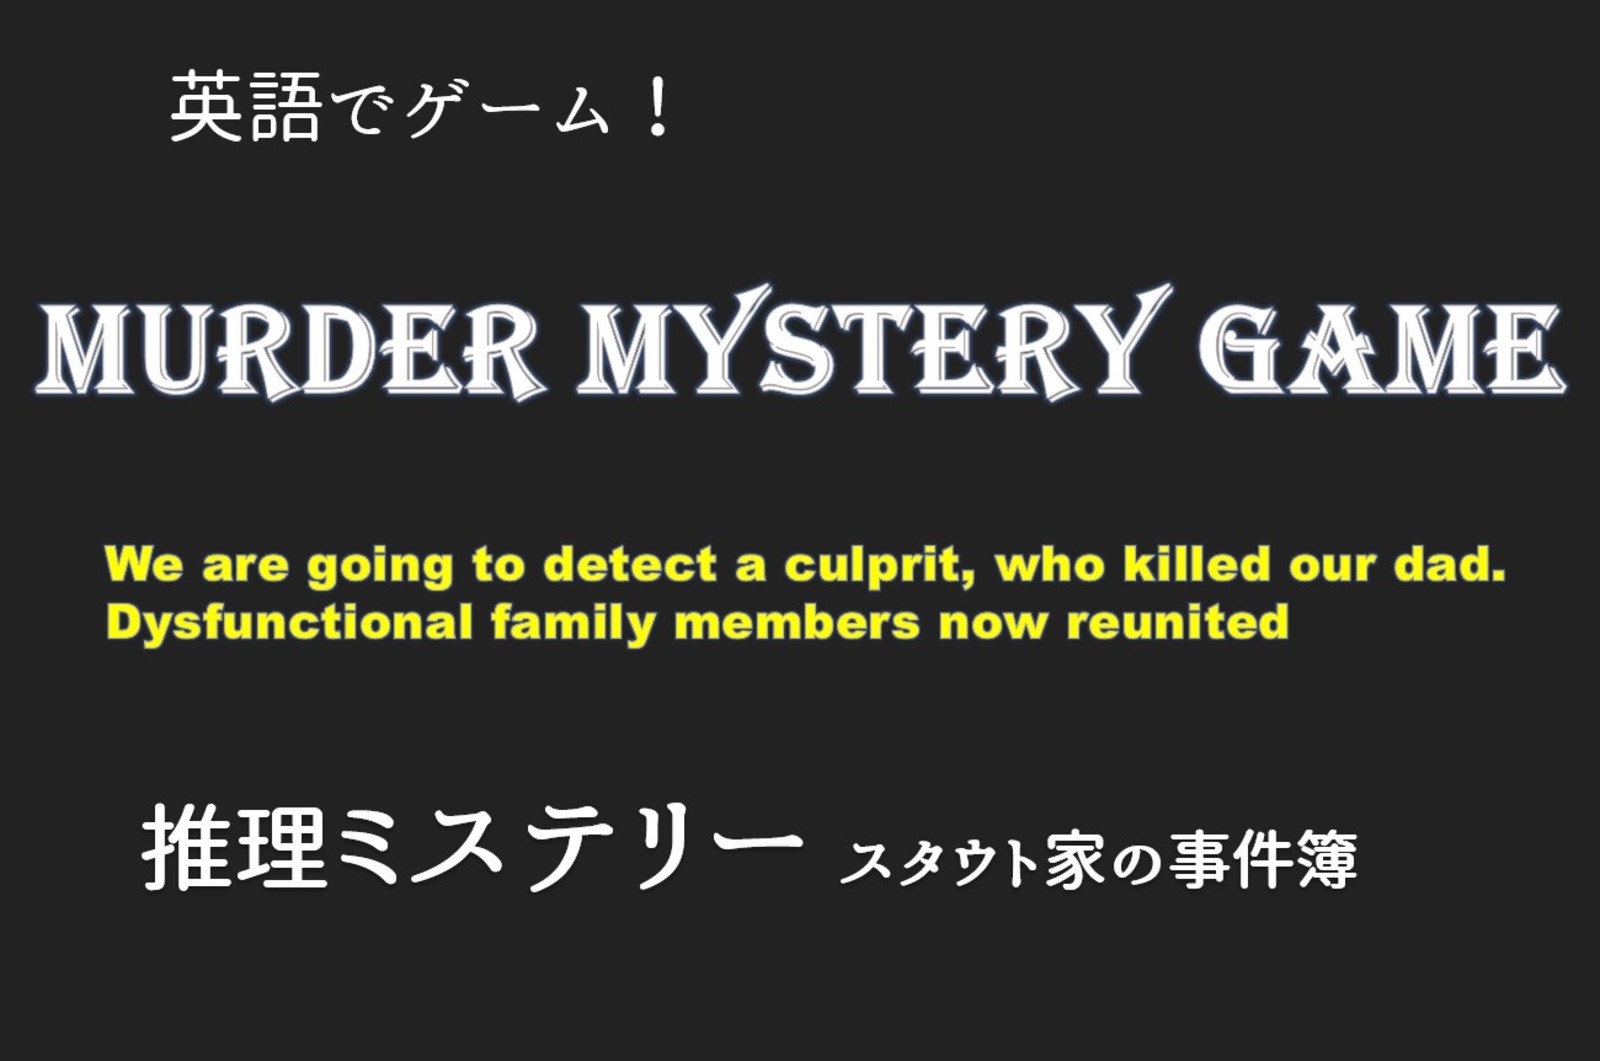 【Murder Mystery】アメリカのゲームで遊んで英語を学ぼう！Engish speakers are welcome to join